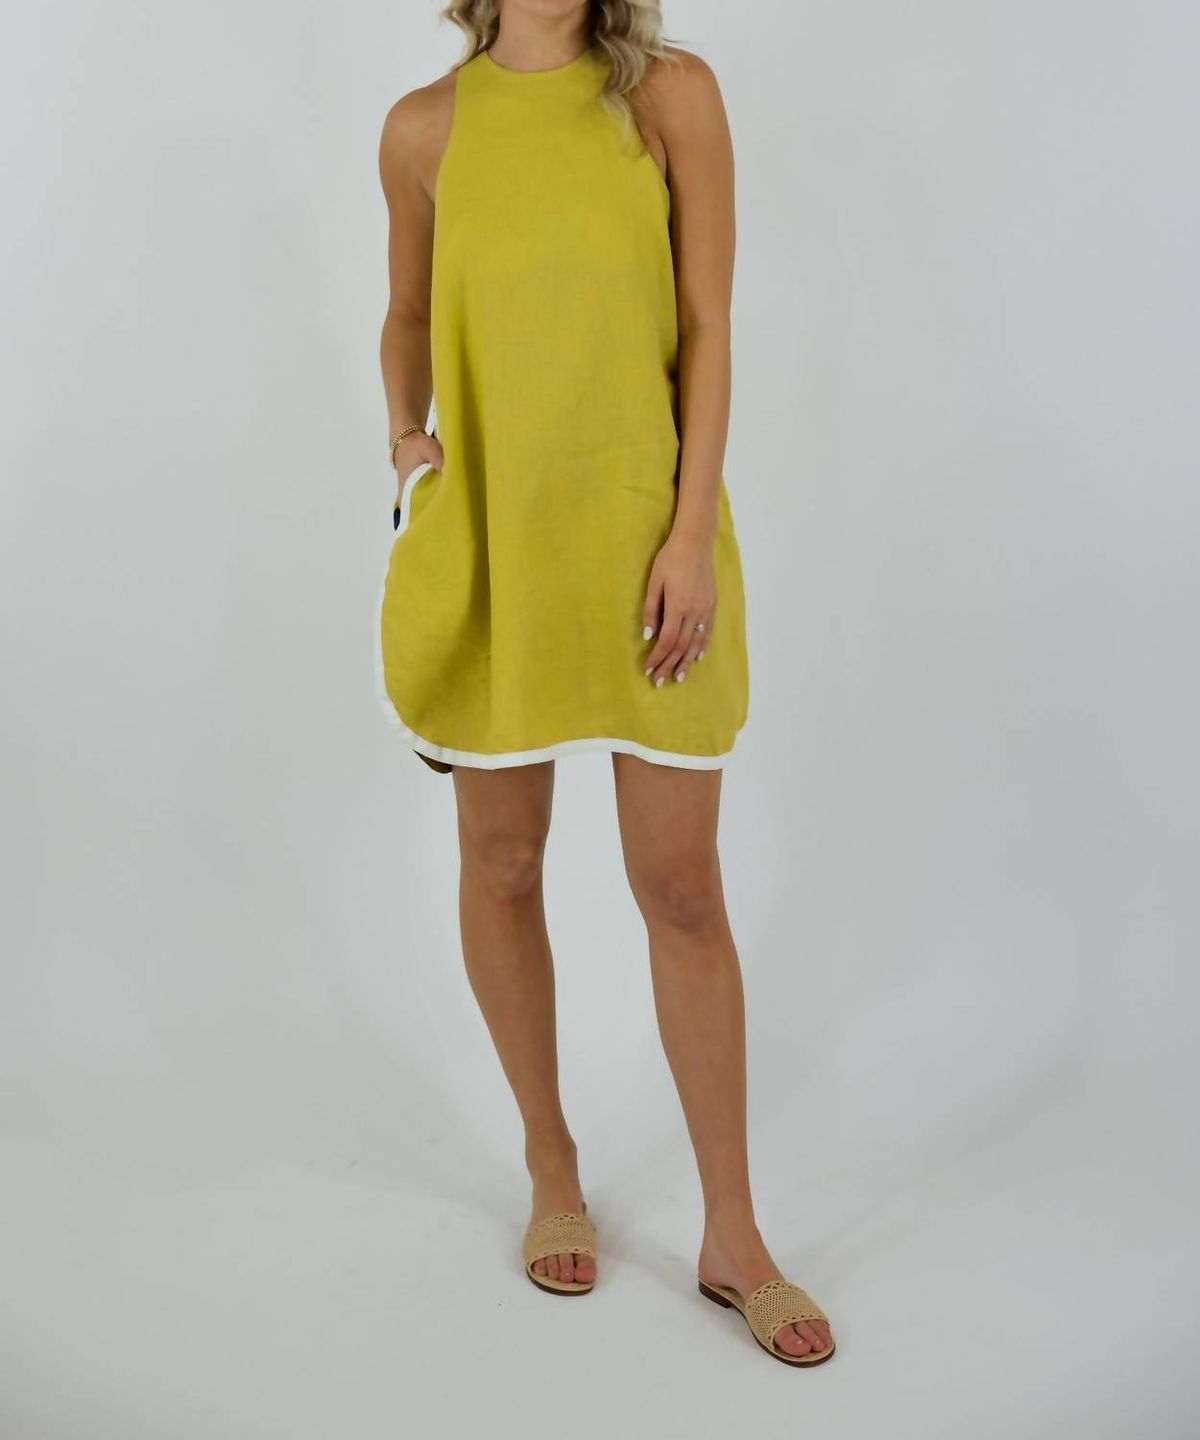 Style 1-2283821433-892 lanhtropy Size M High Neck Yellow Cocktail Dress on Queenly